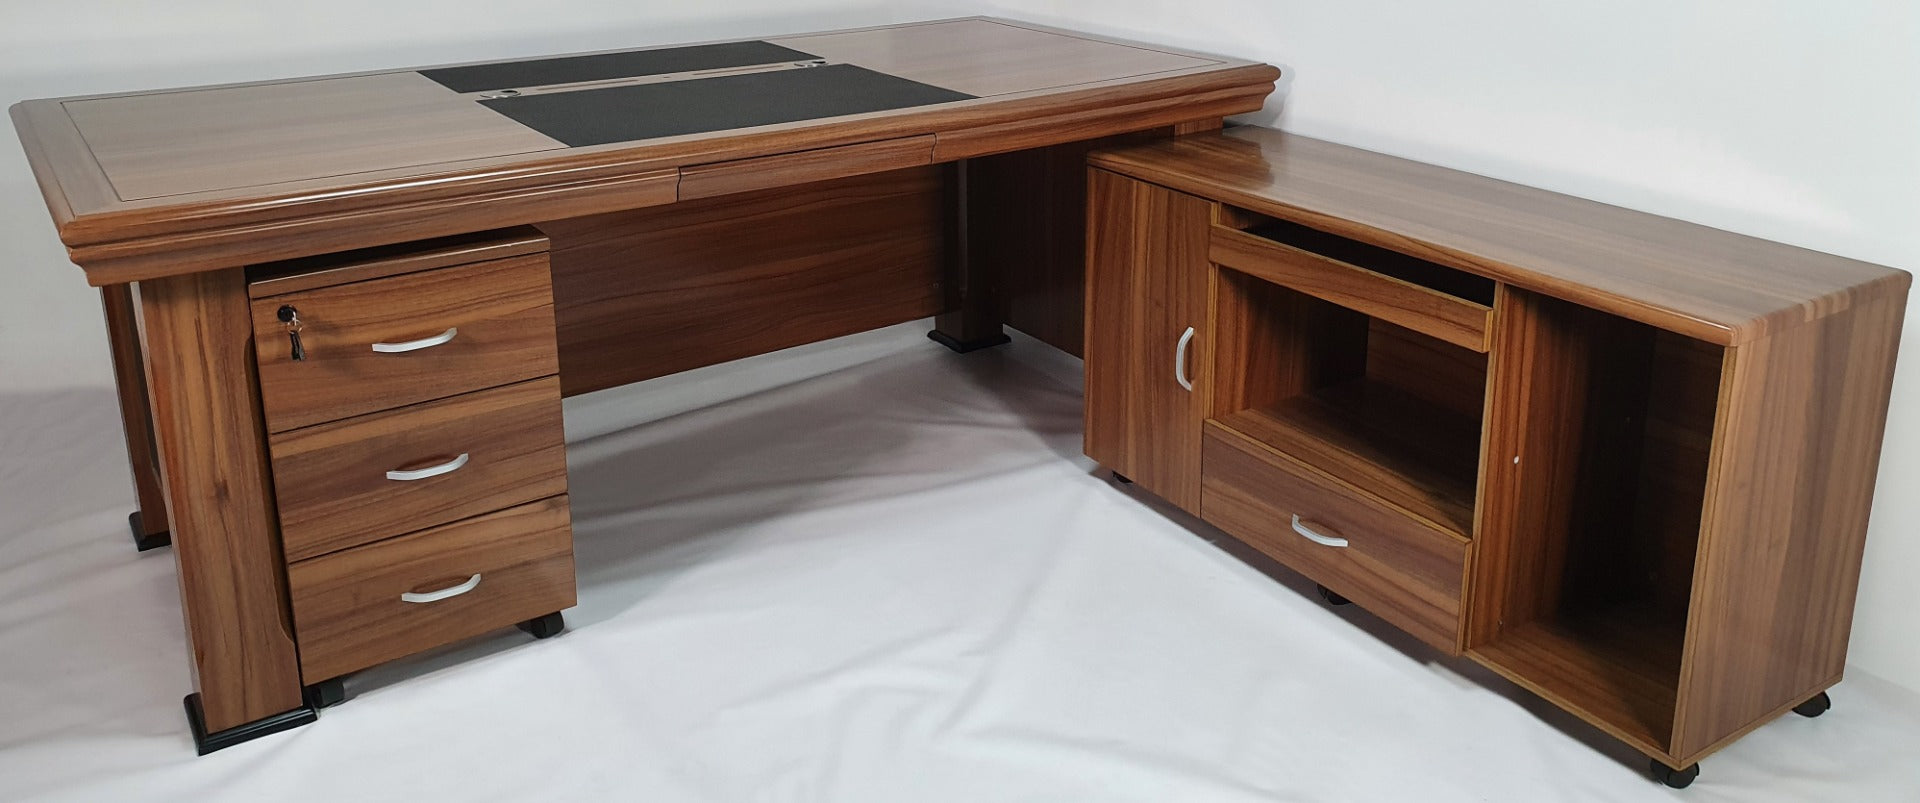 Light Oak Executive Desk With Leather Detailing - With Pedestal and Return - 2233